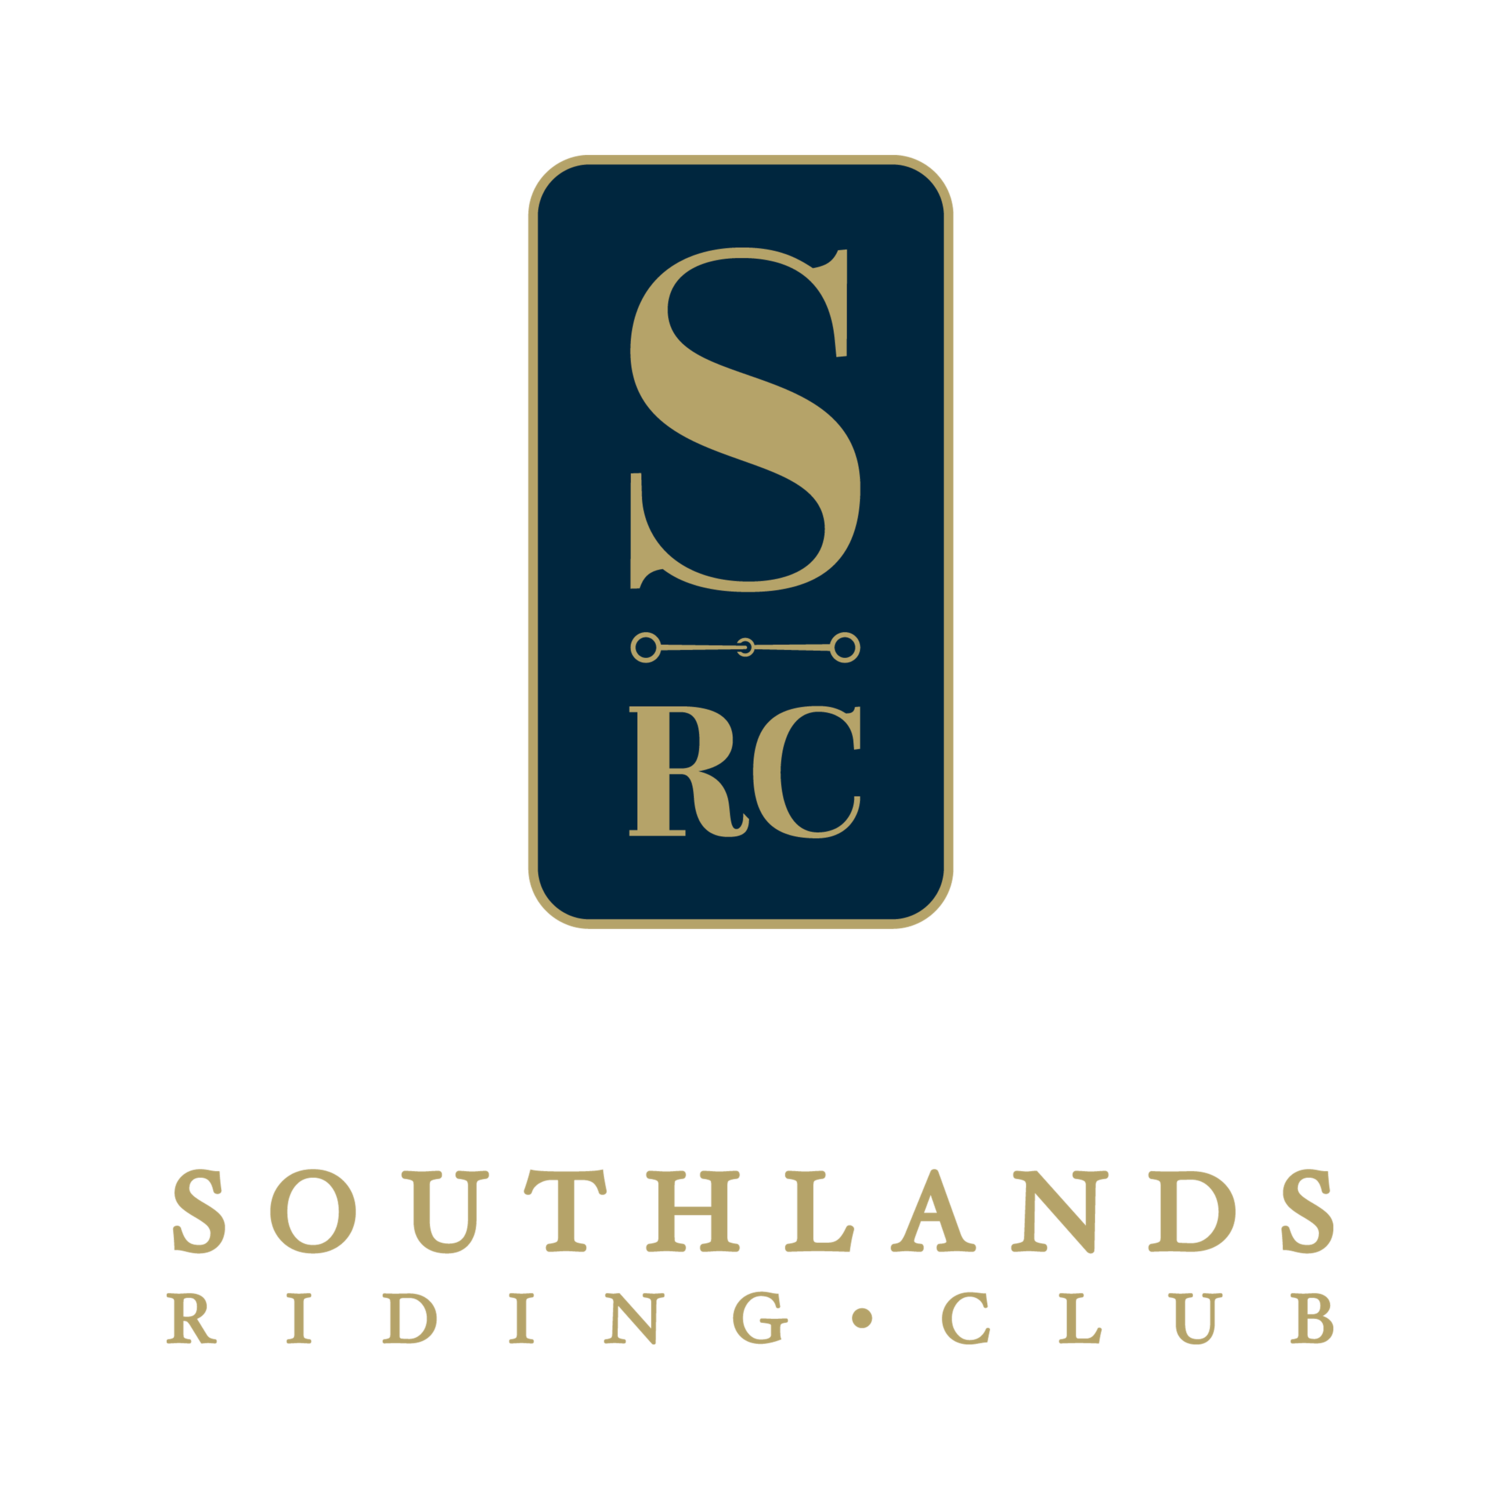 SOUTHLANDS RIDING CLUB